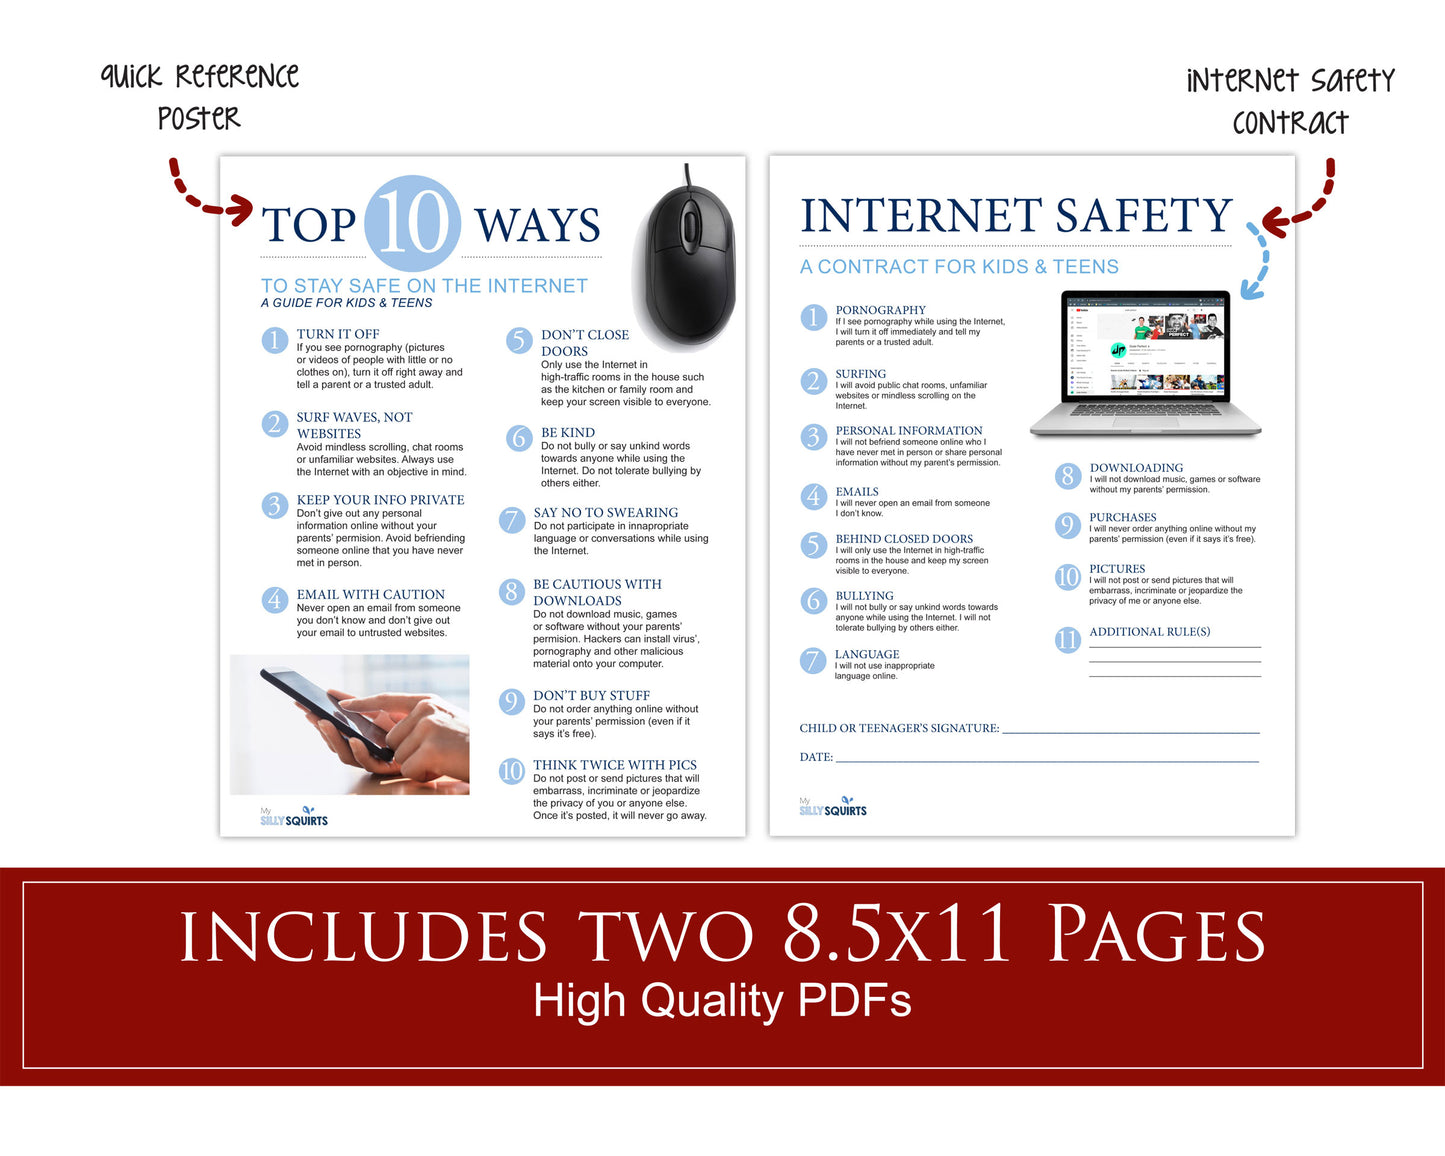 Internet Safety Contract and Poster